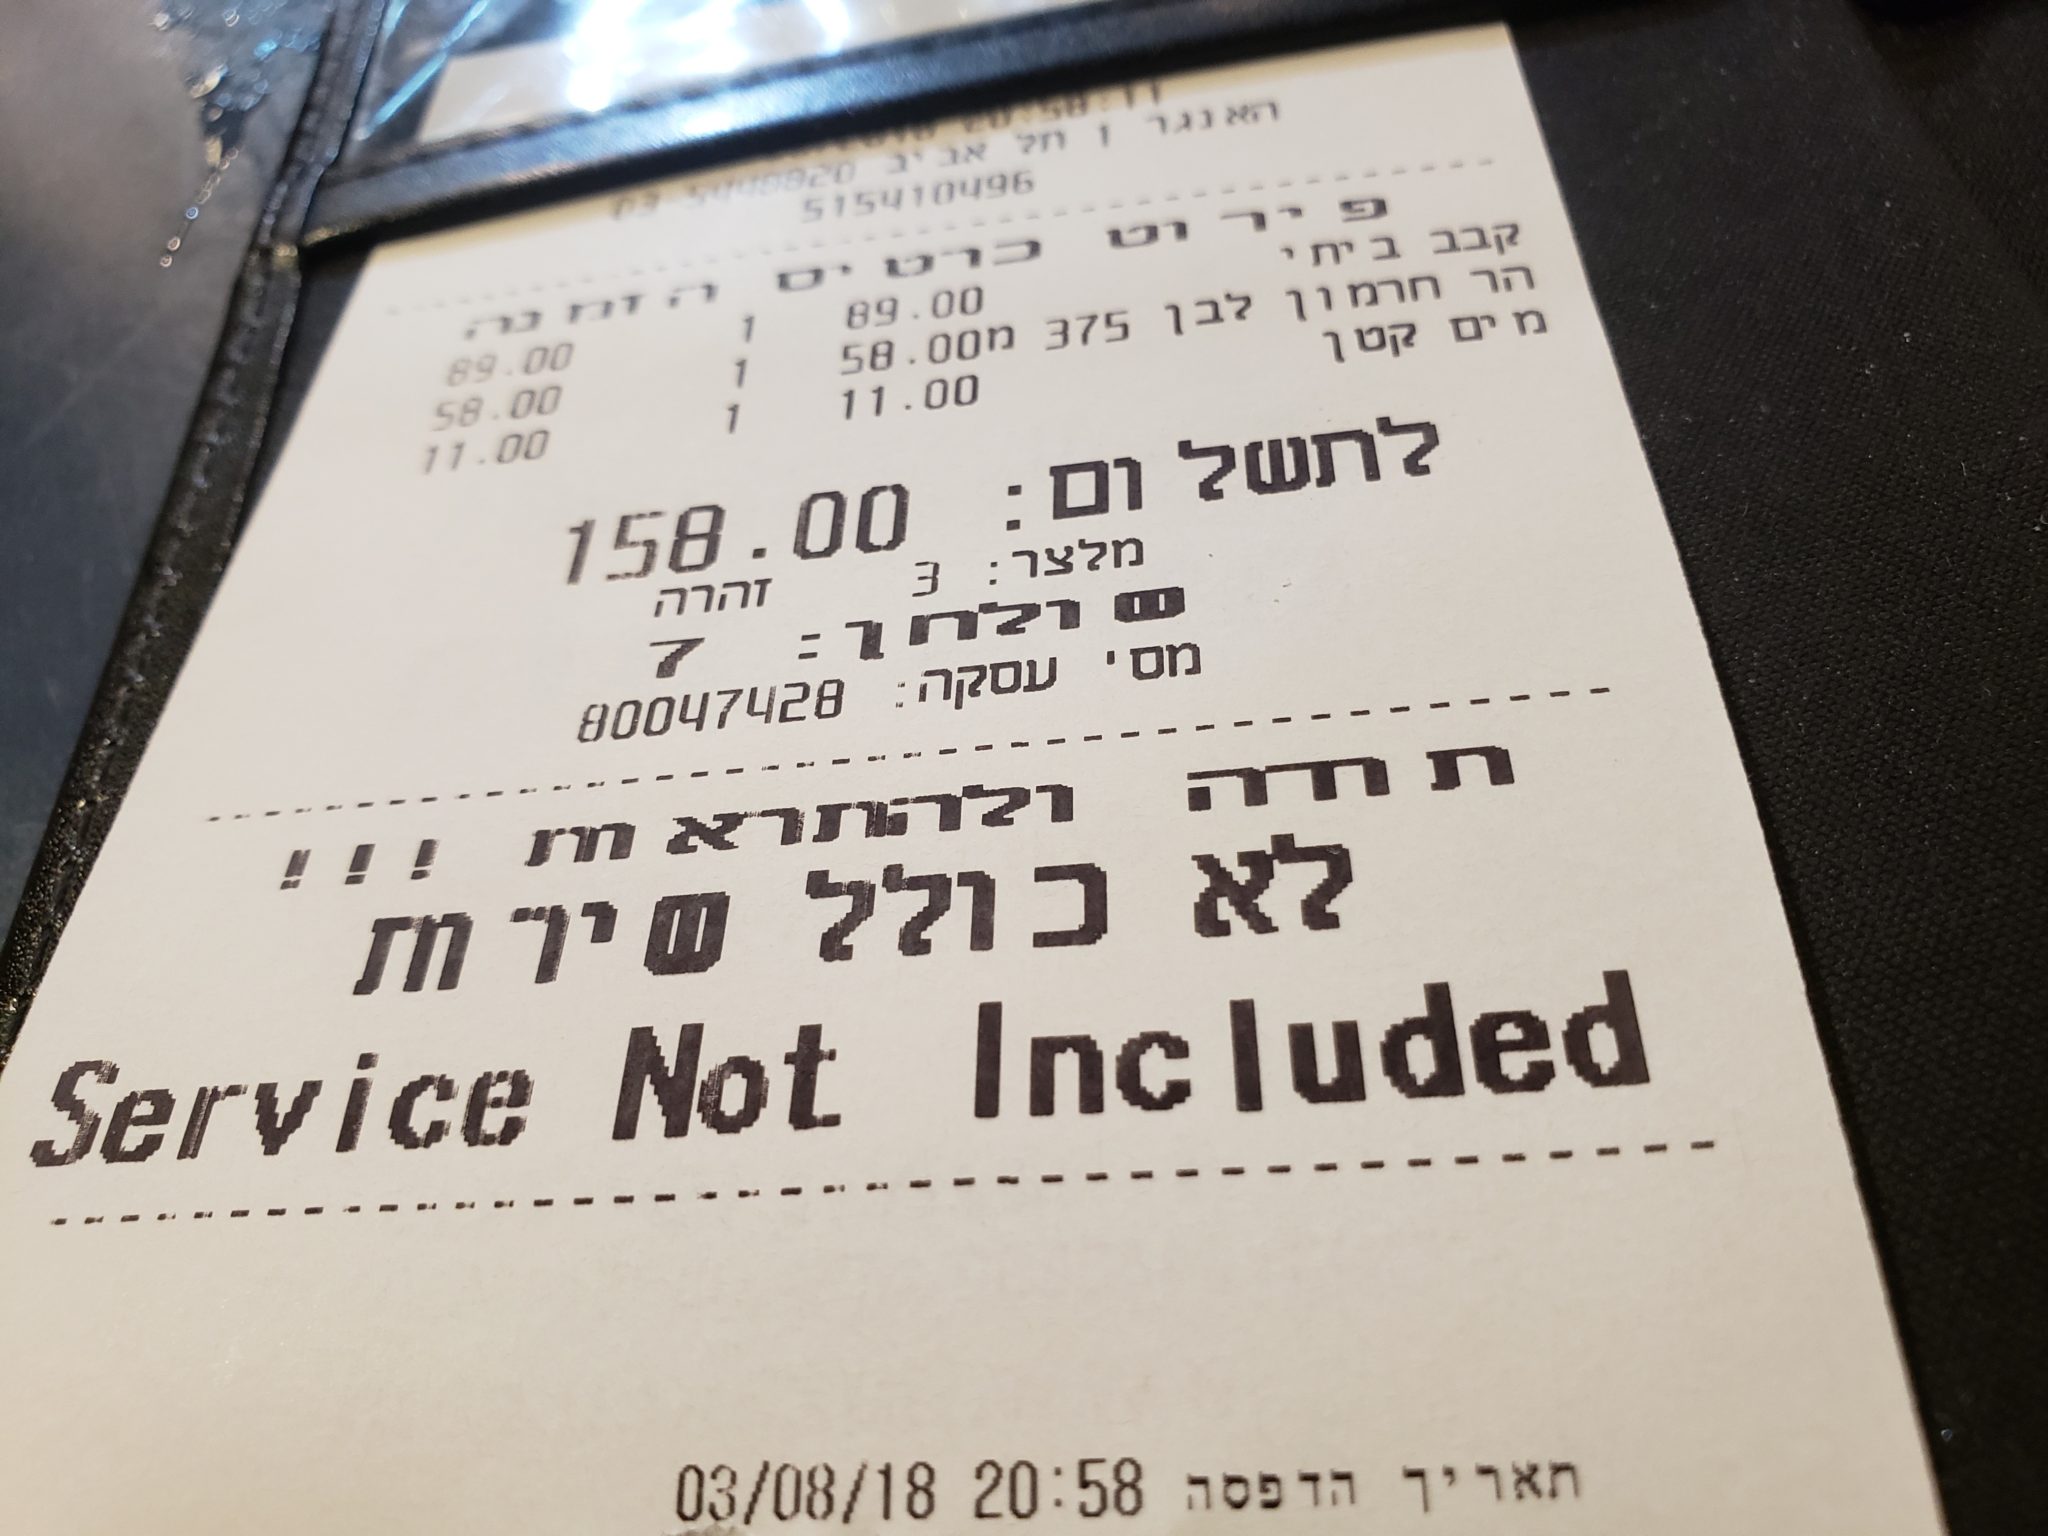 a receipt with black text and numbers